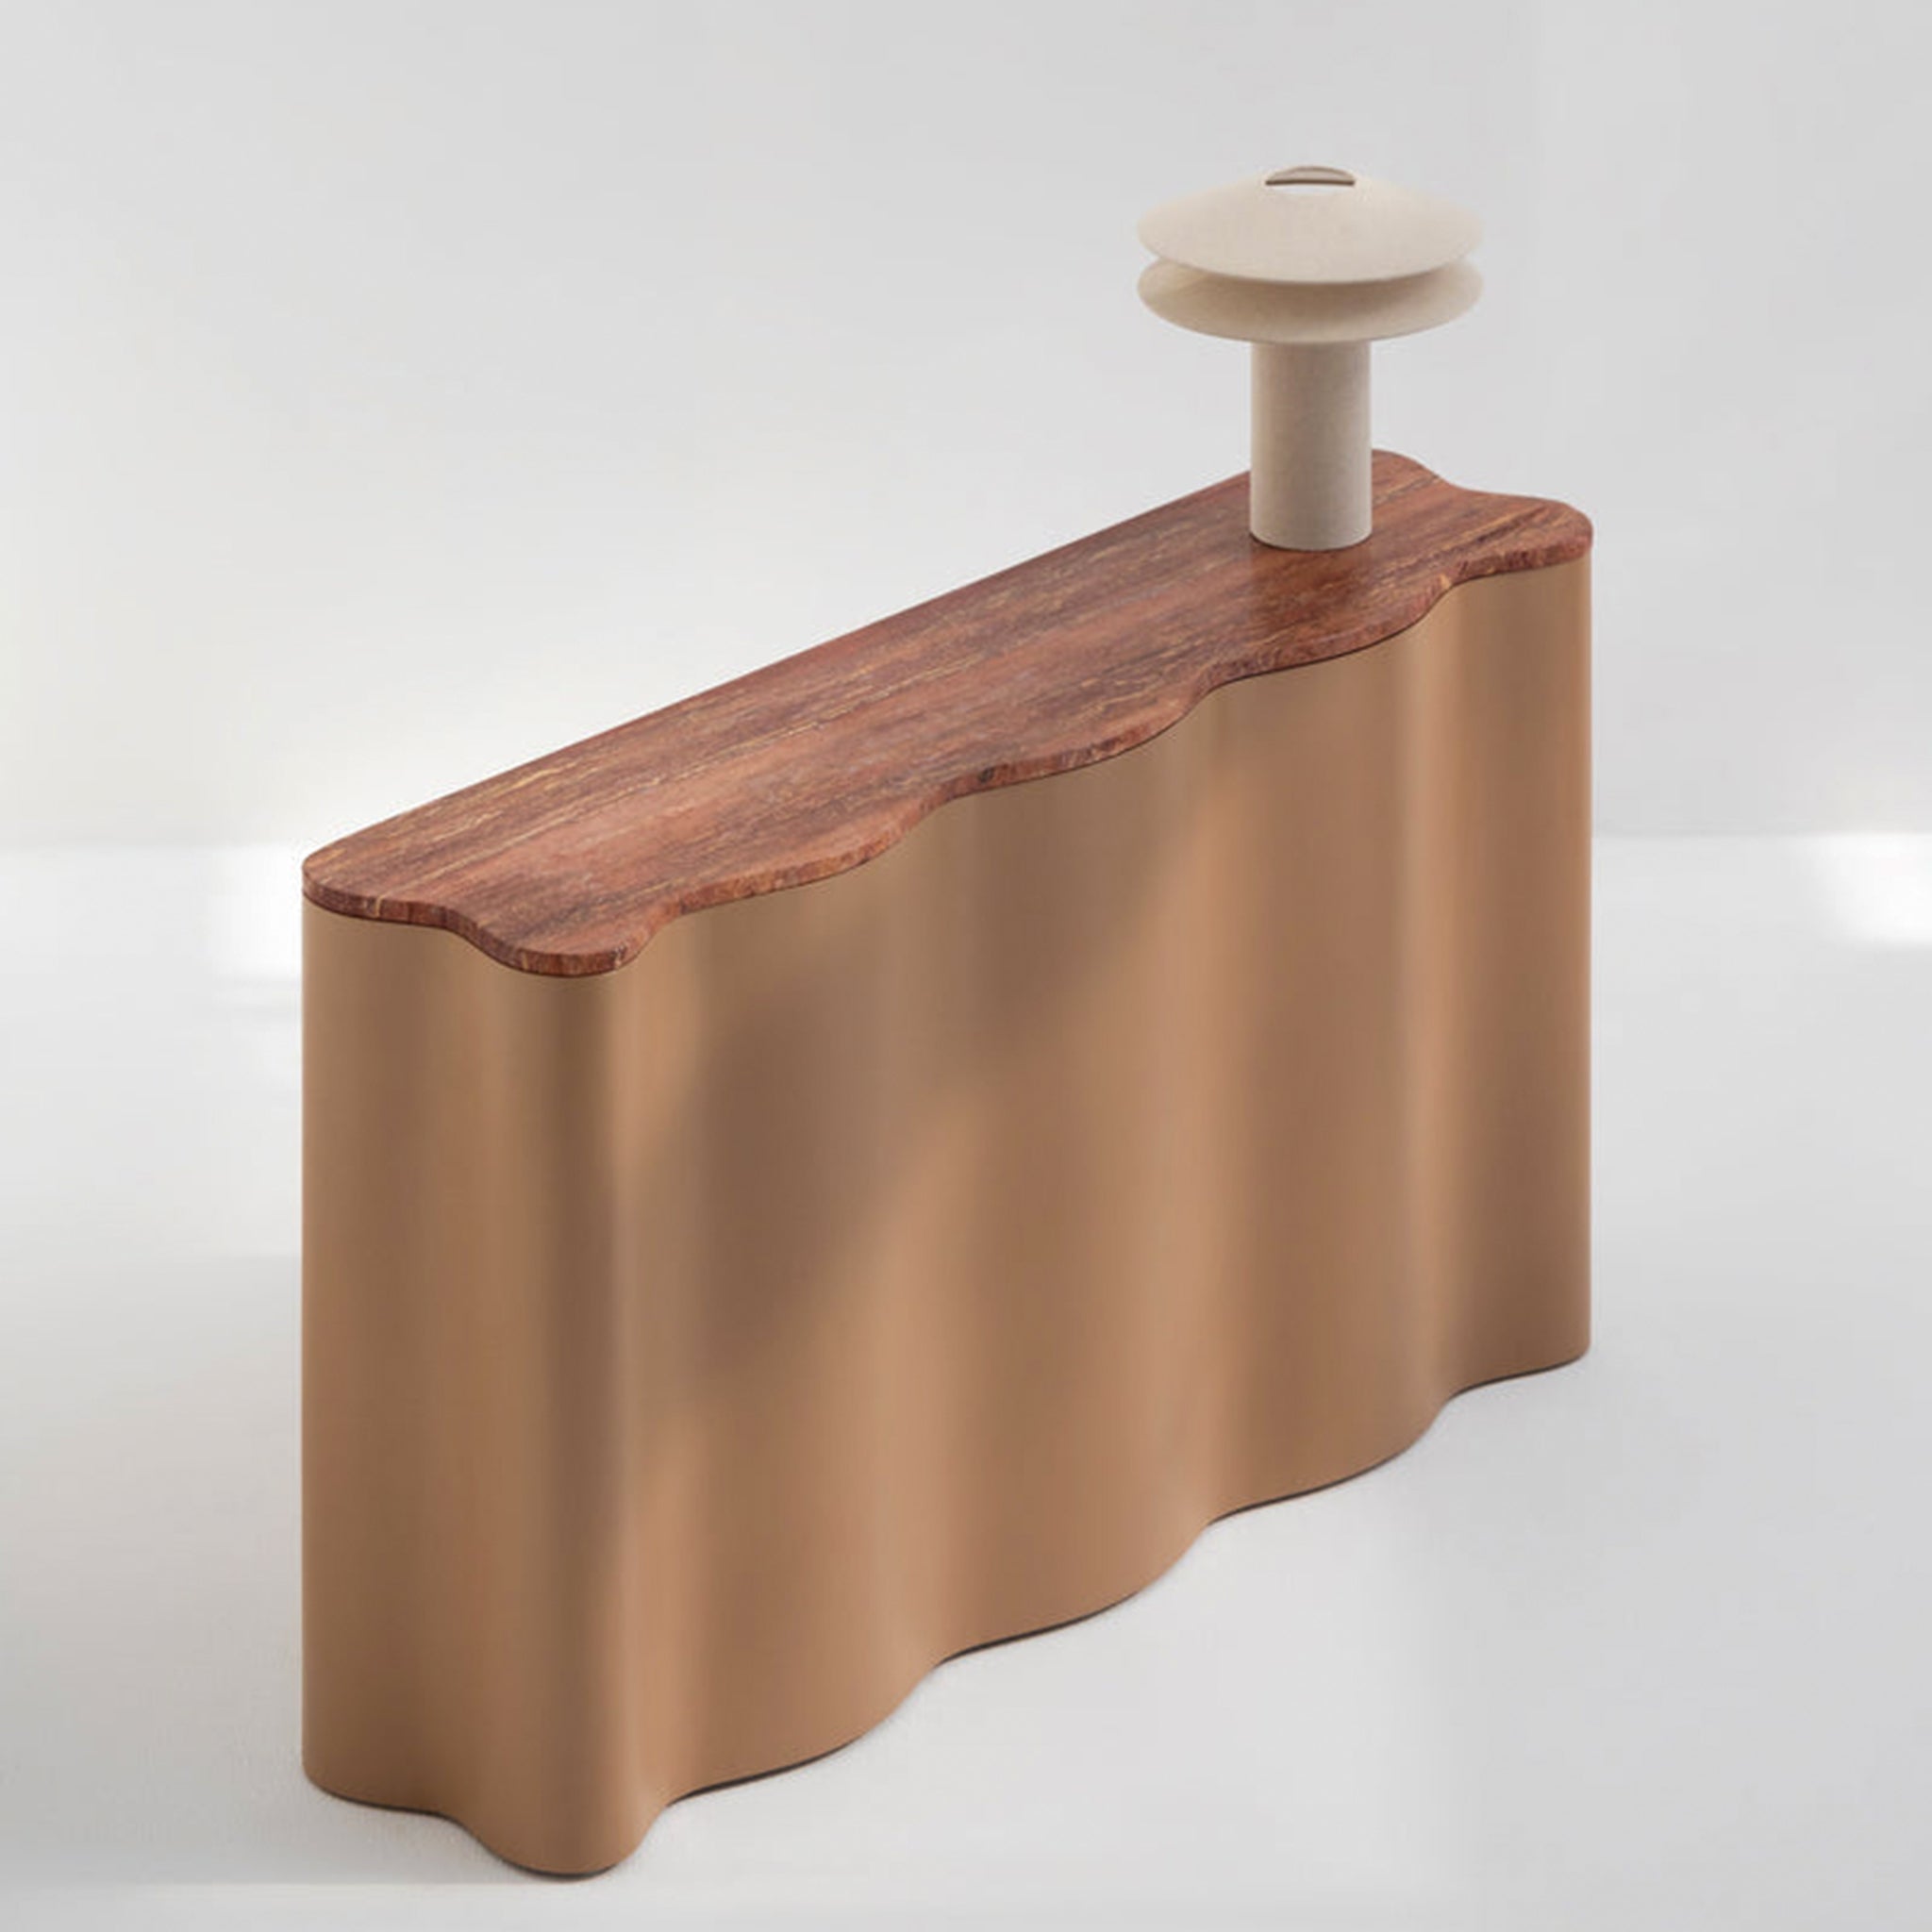 "Modern console table featuring a playful wavy shape and a wooden top."